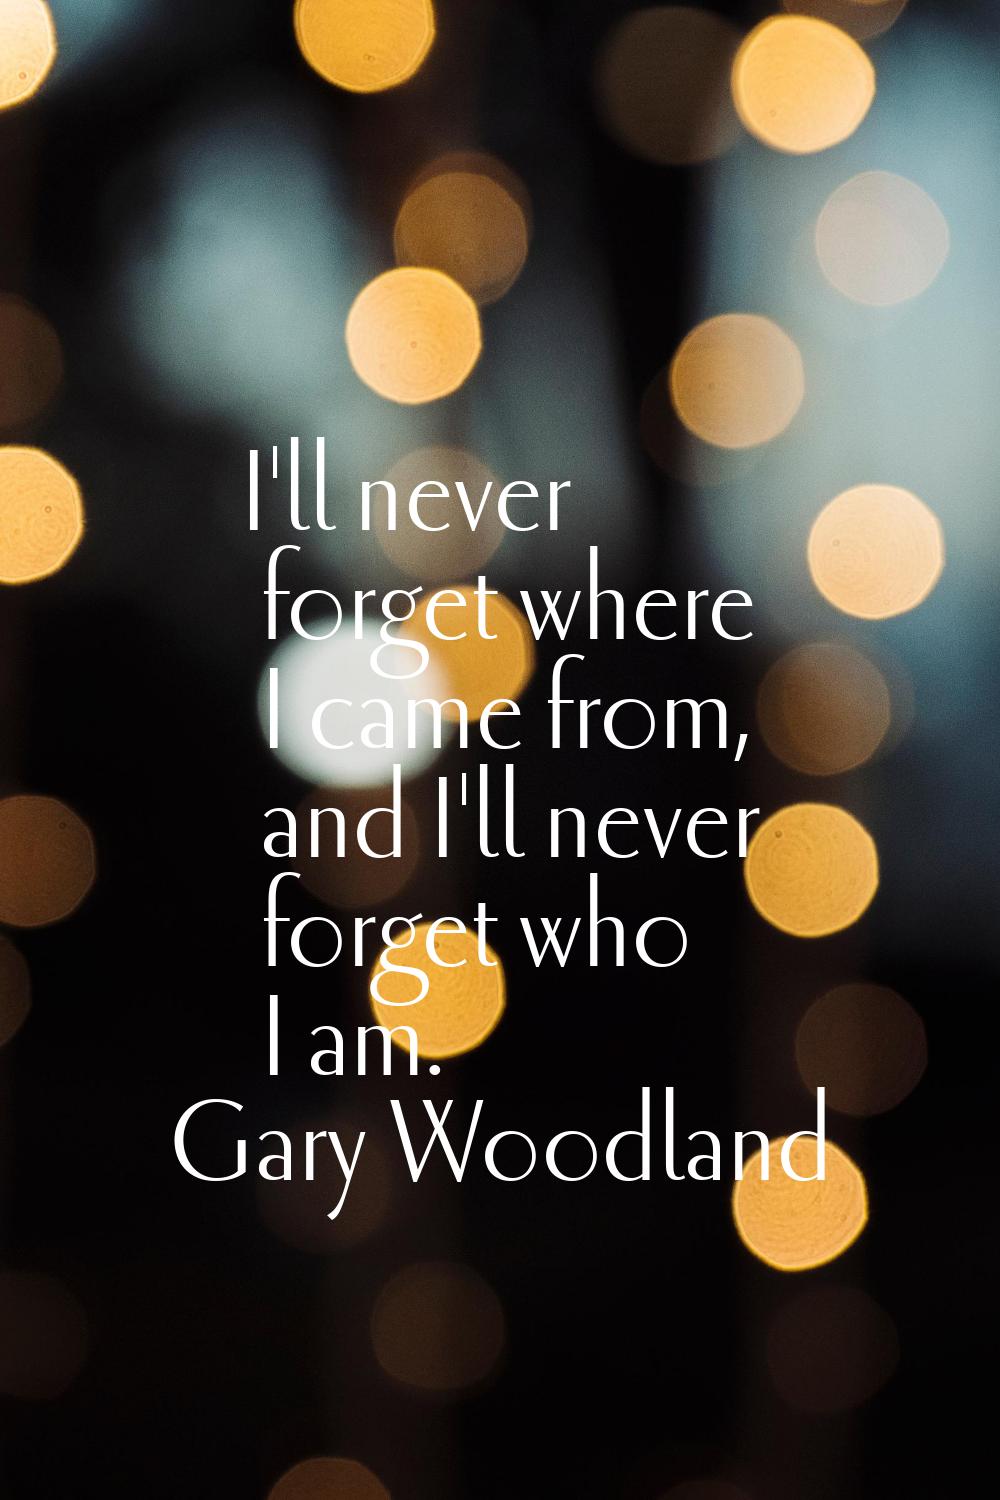 I'll never forget where I came from, and I'll never forget who I am.